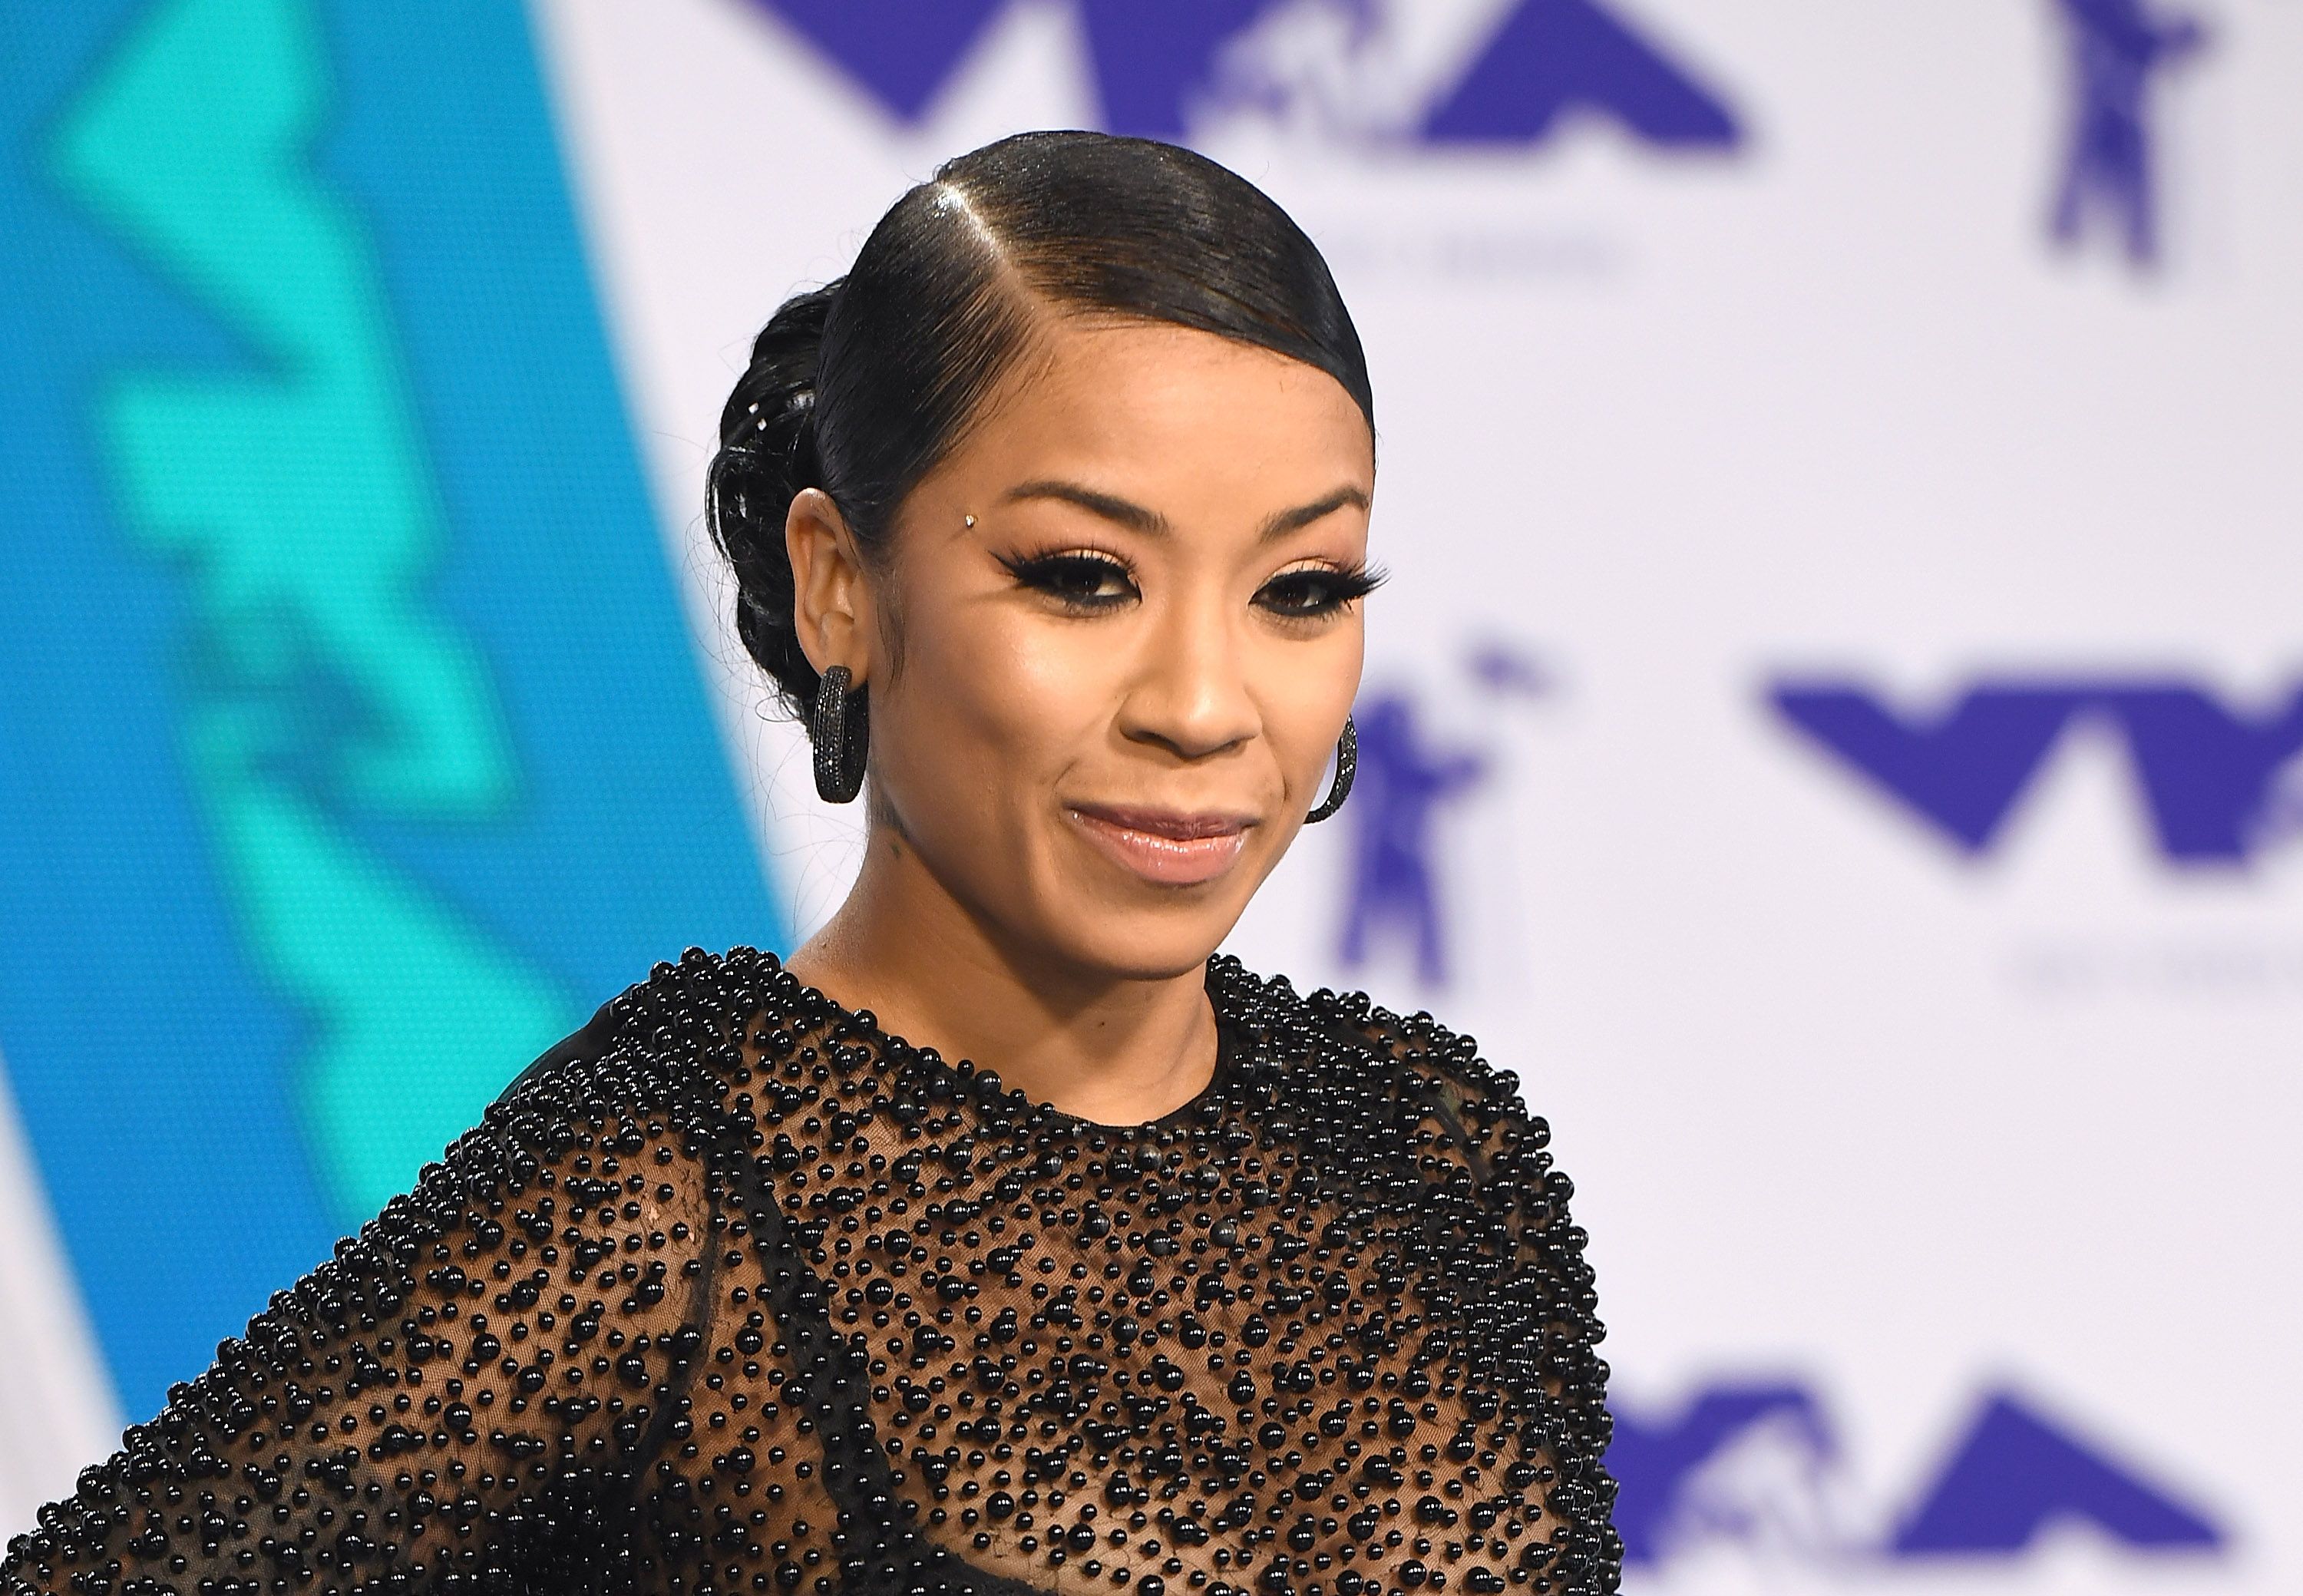 Keyshia Cole at the 2017 MTV Video Music Awards at The Forum on August 27, 2017. | Photo: Getty Images